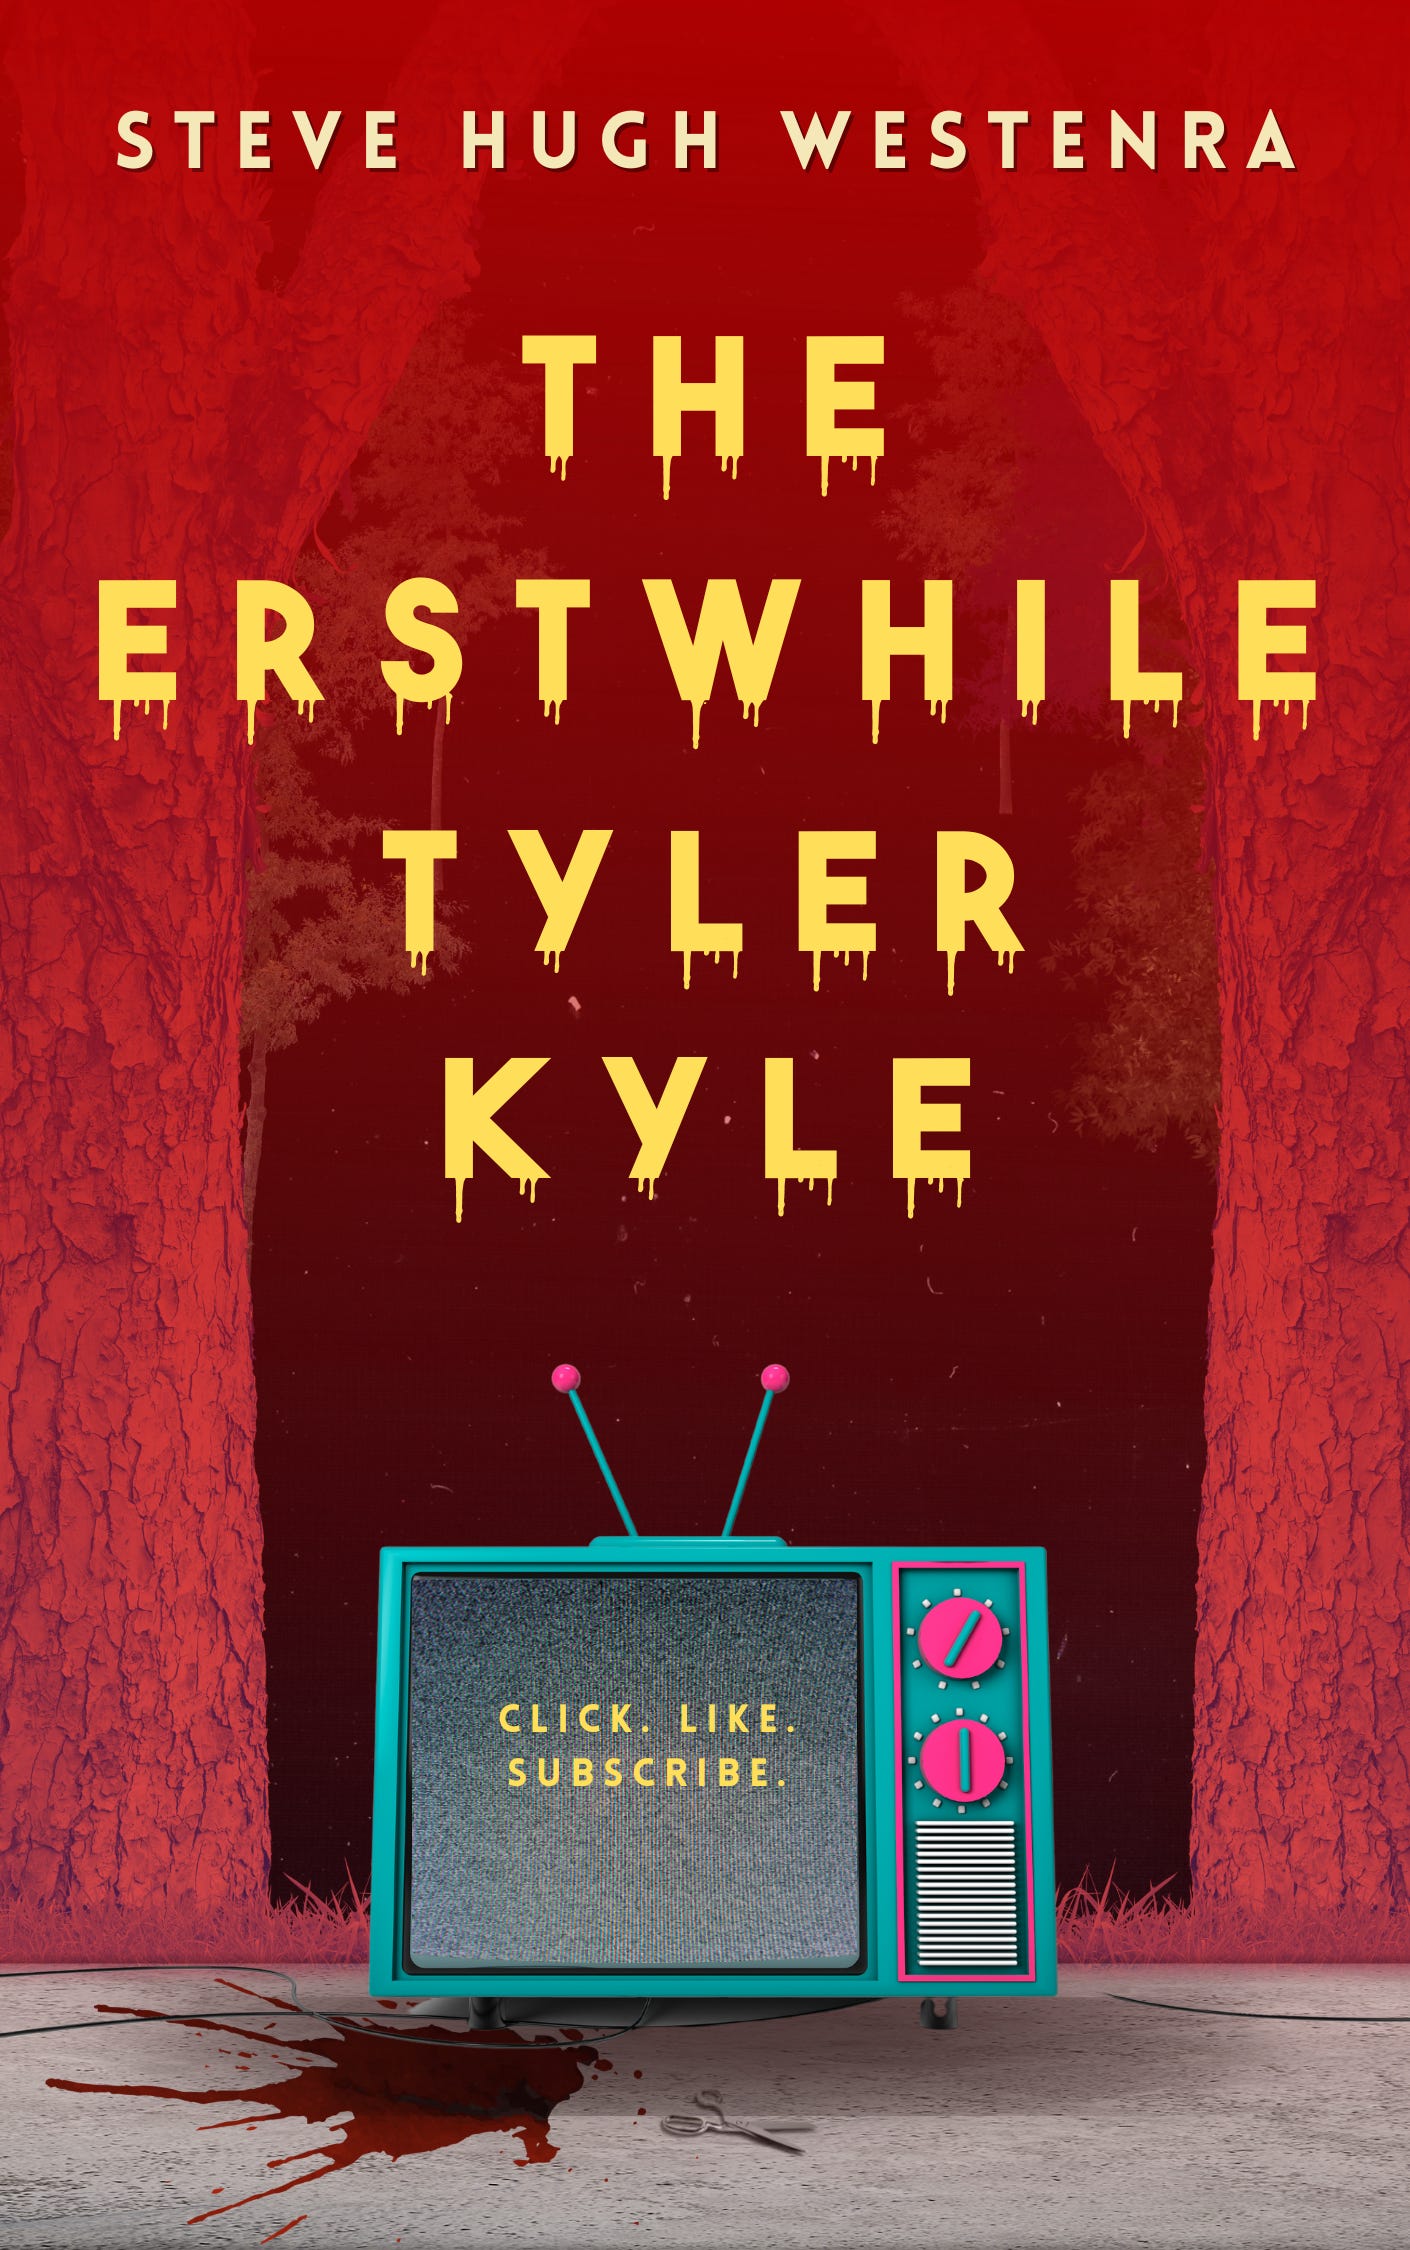 Cover for The Erstwhile Tyler Kyle. Font is a dripping bright yellow on a red-tinted background that features trees framing the text like pulled theatre curtains. A jazzy aquamarine and neon pink-framed television sits in the foreground. On the tv is static with the yellow text: "Click. Like. Subscribe." on it. A large bloodstain rests beneath the TV and an open pair of scissors lies in front of it. The TV and scissors rest on a concrete floor.